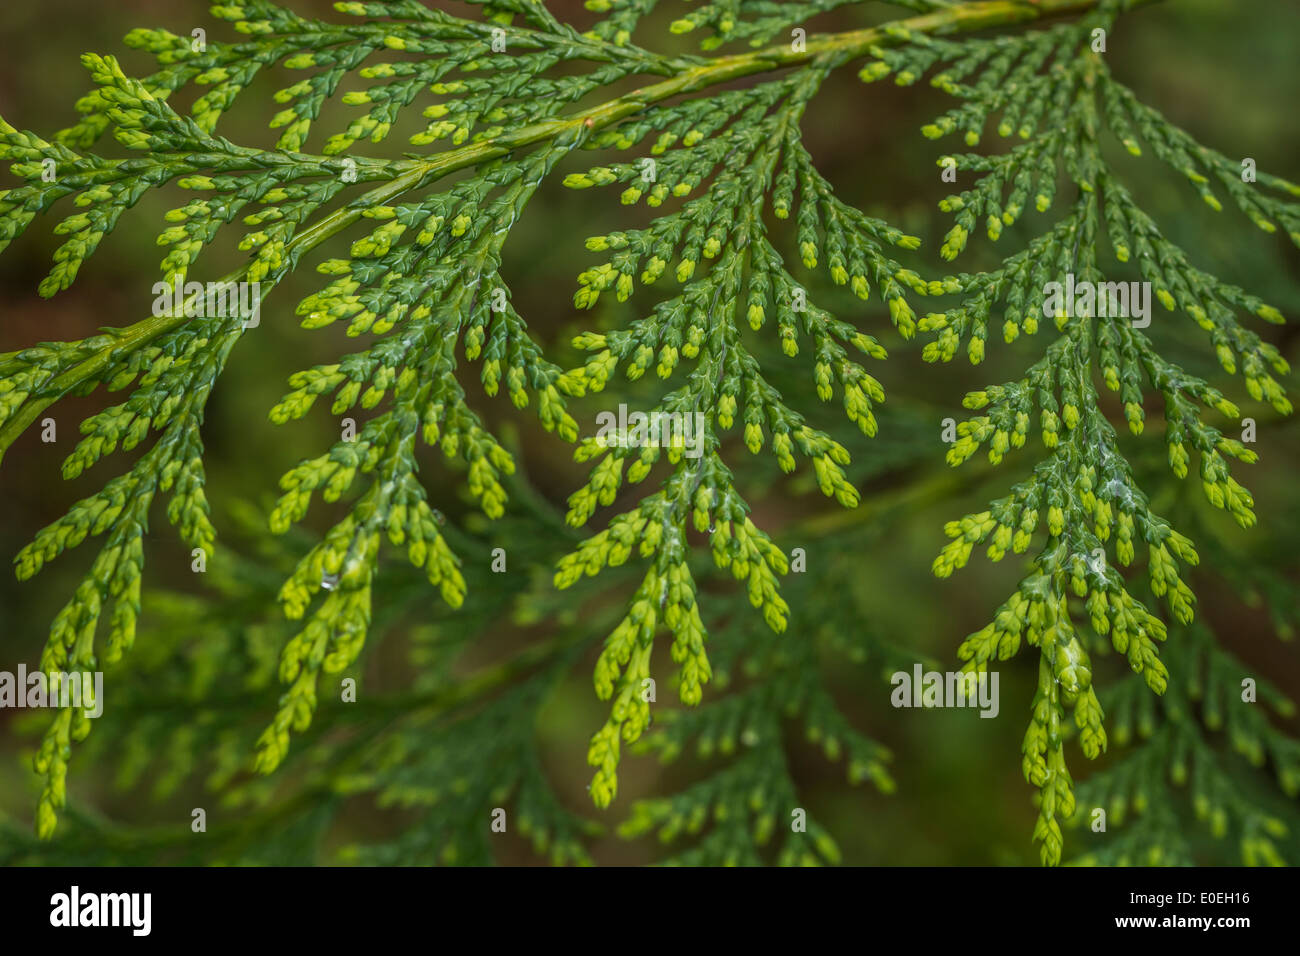 Early foliage of what is believed to be a Cypress tree - not fully identified but perhaps Chamaecyparis obtusa. Stock Photo